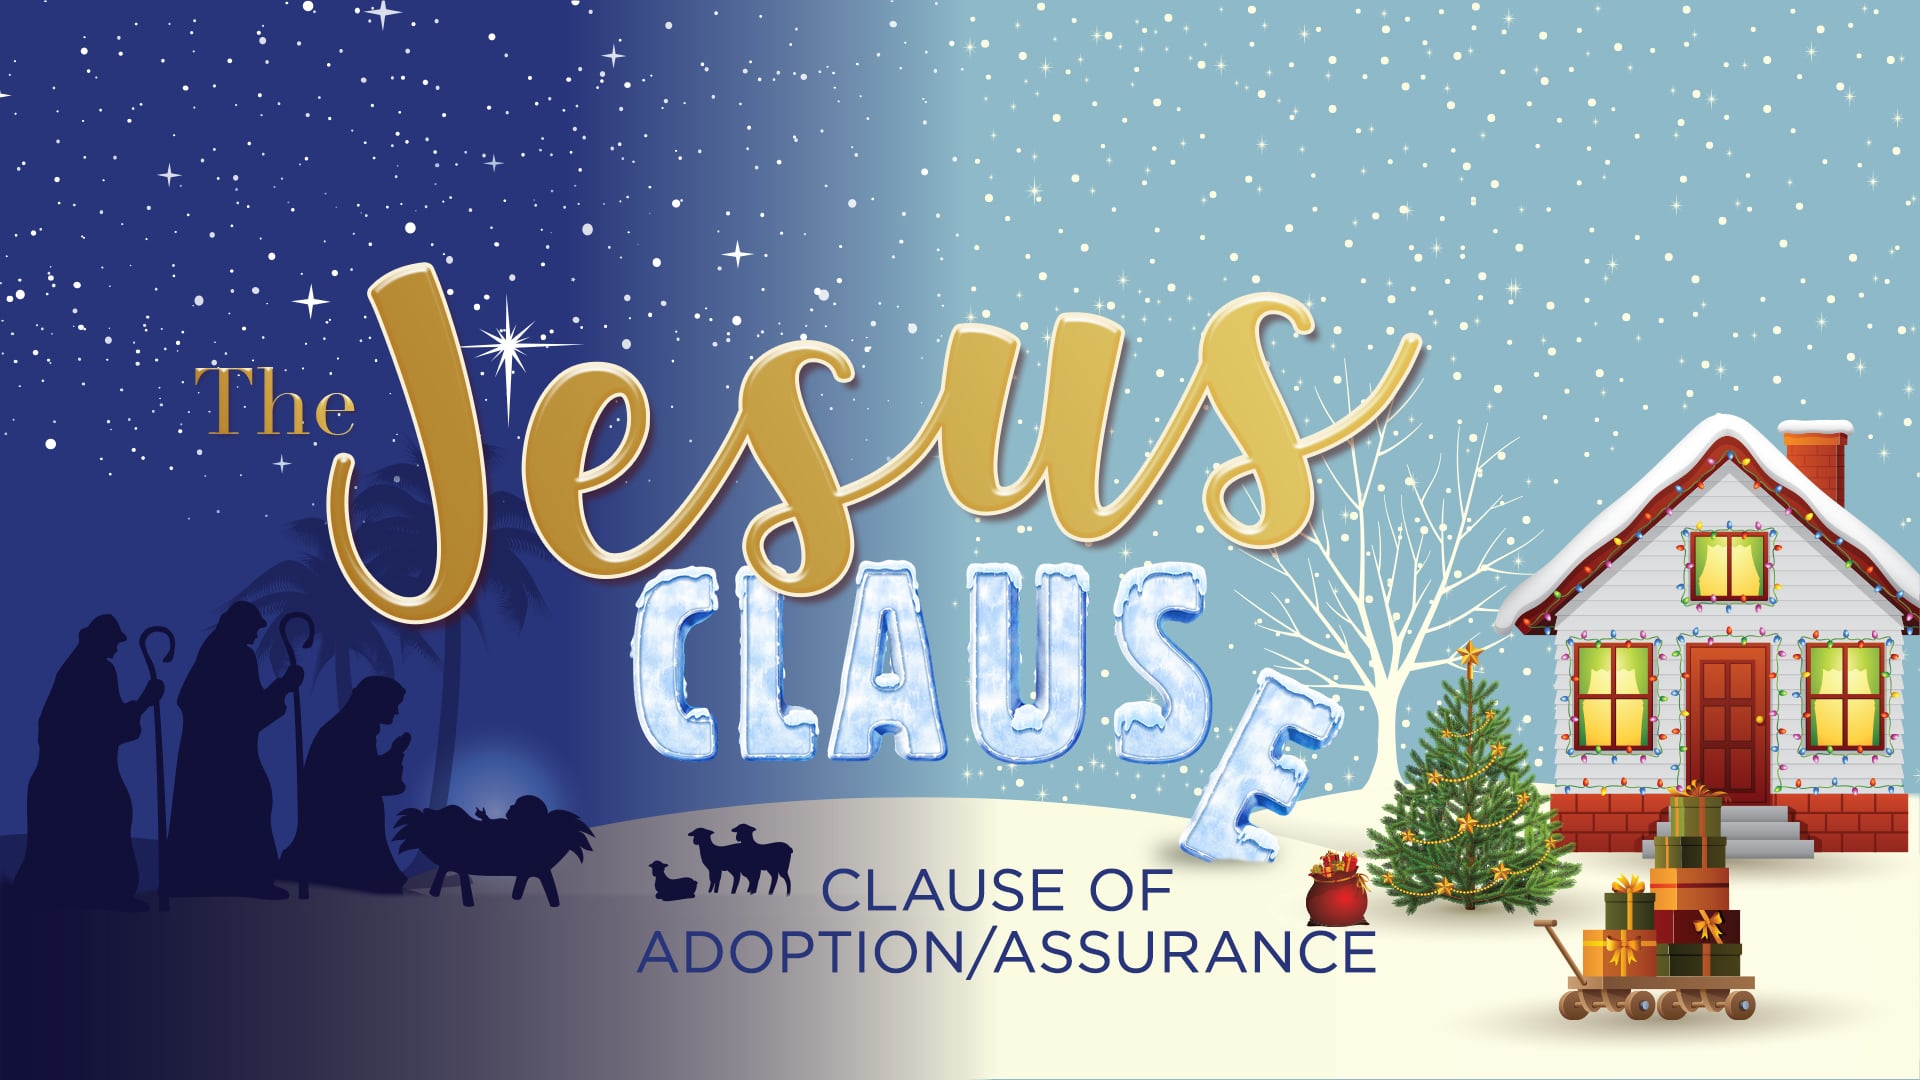 Clause Of Adoption/Assurance